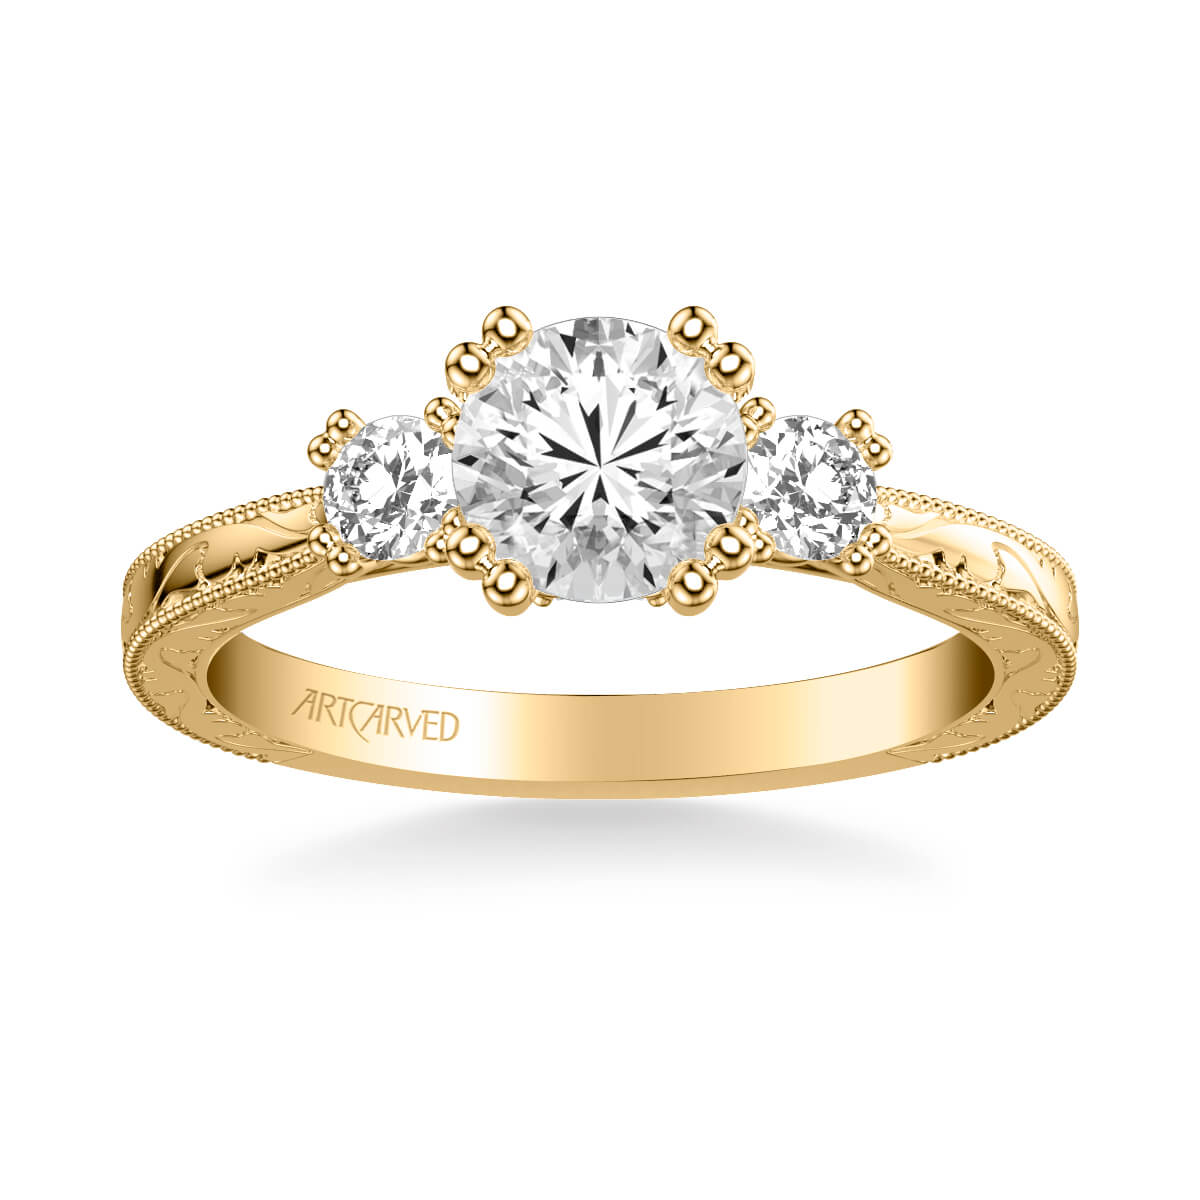 Antique Art Deco and Modern Diamond Engagement Rings | Rutherford